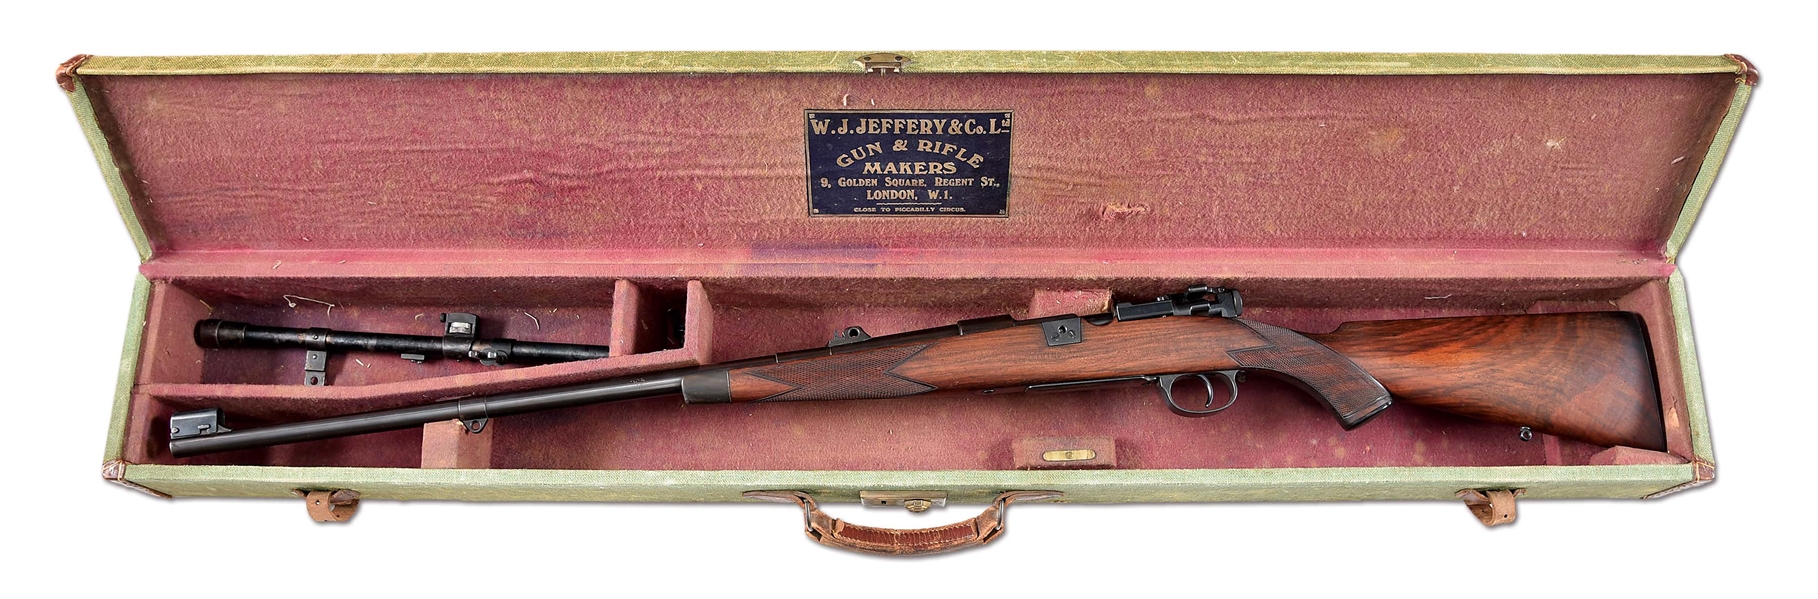 (C) W.J. JEFFREY BOLT ACTION RIFLE IN .333 EXPRESS WITH SCOPE AND CASE.